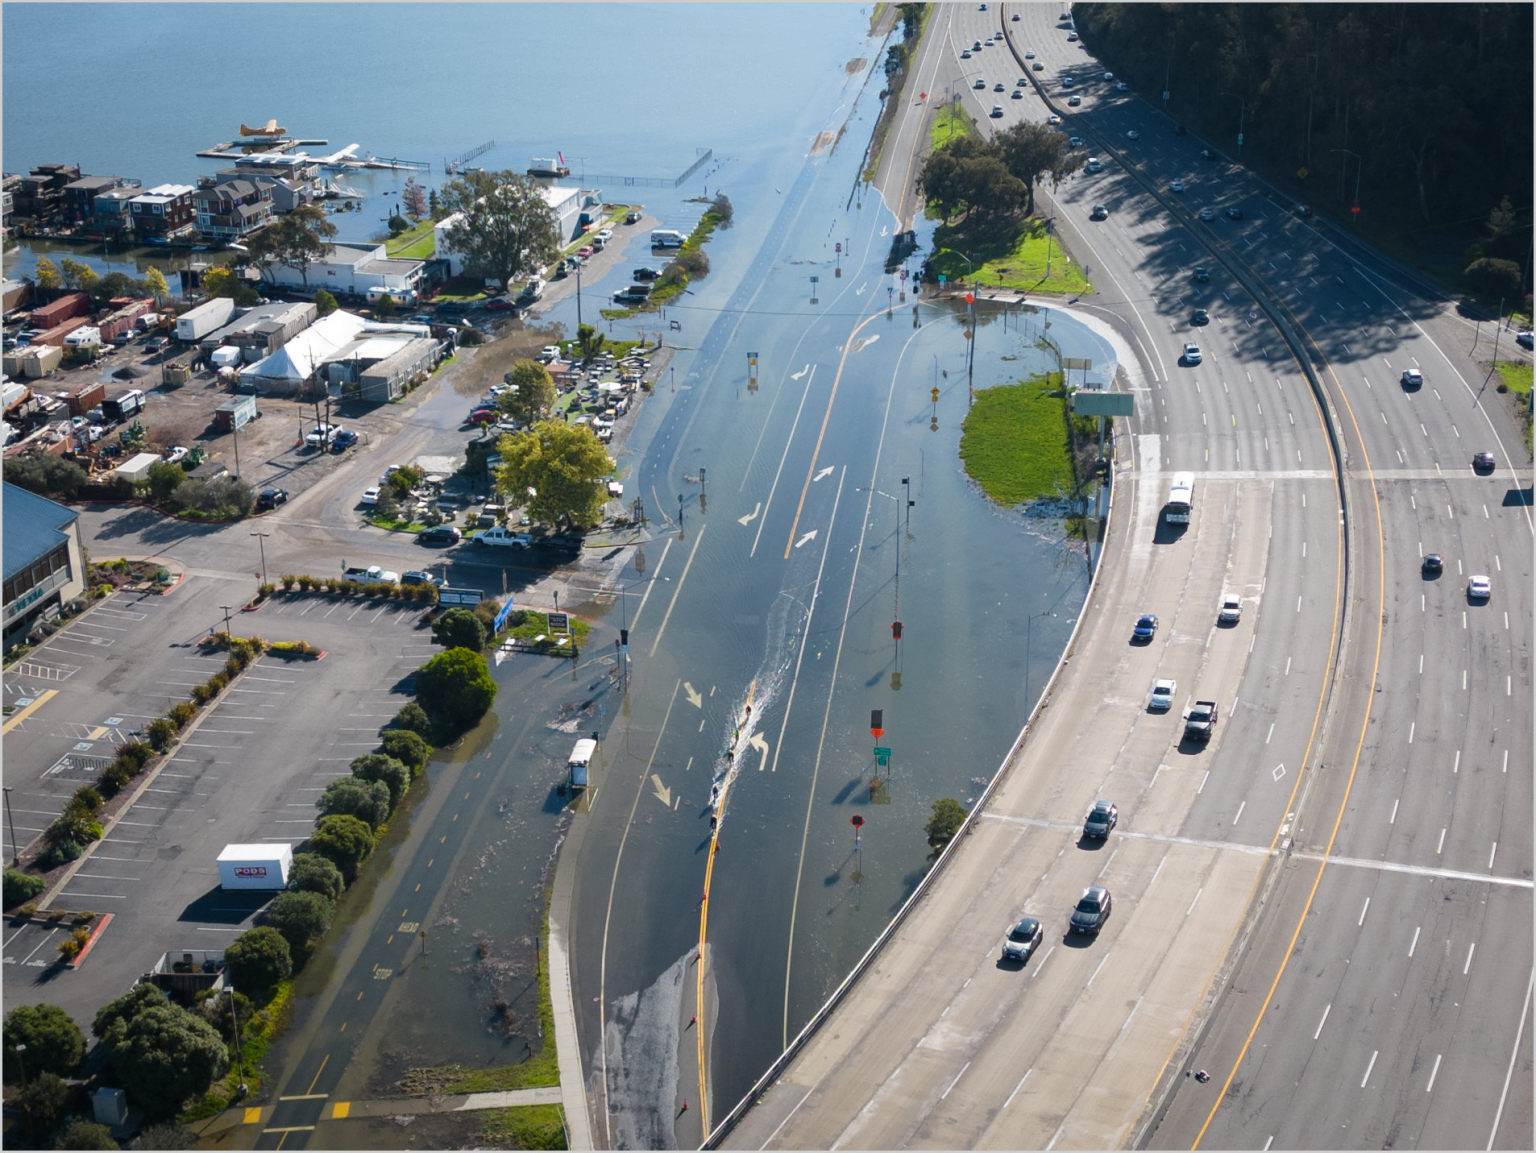  

An unusually high tide, called a King Tide, floods a highway on-ramp in Northern California in January 2023. Sea level rise and El Niños can exacerbate this type of flooding.

California King Tides Project
